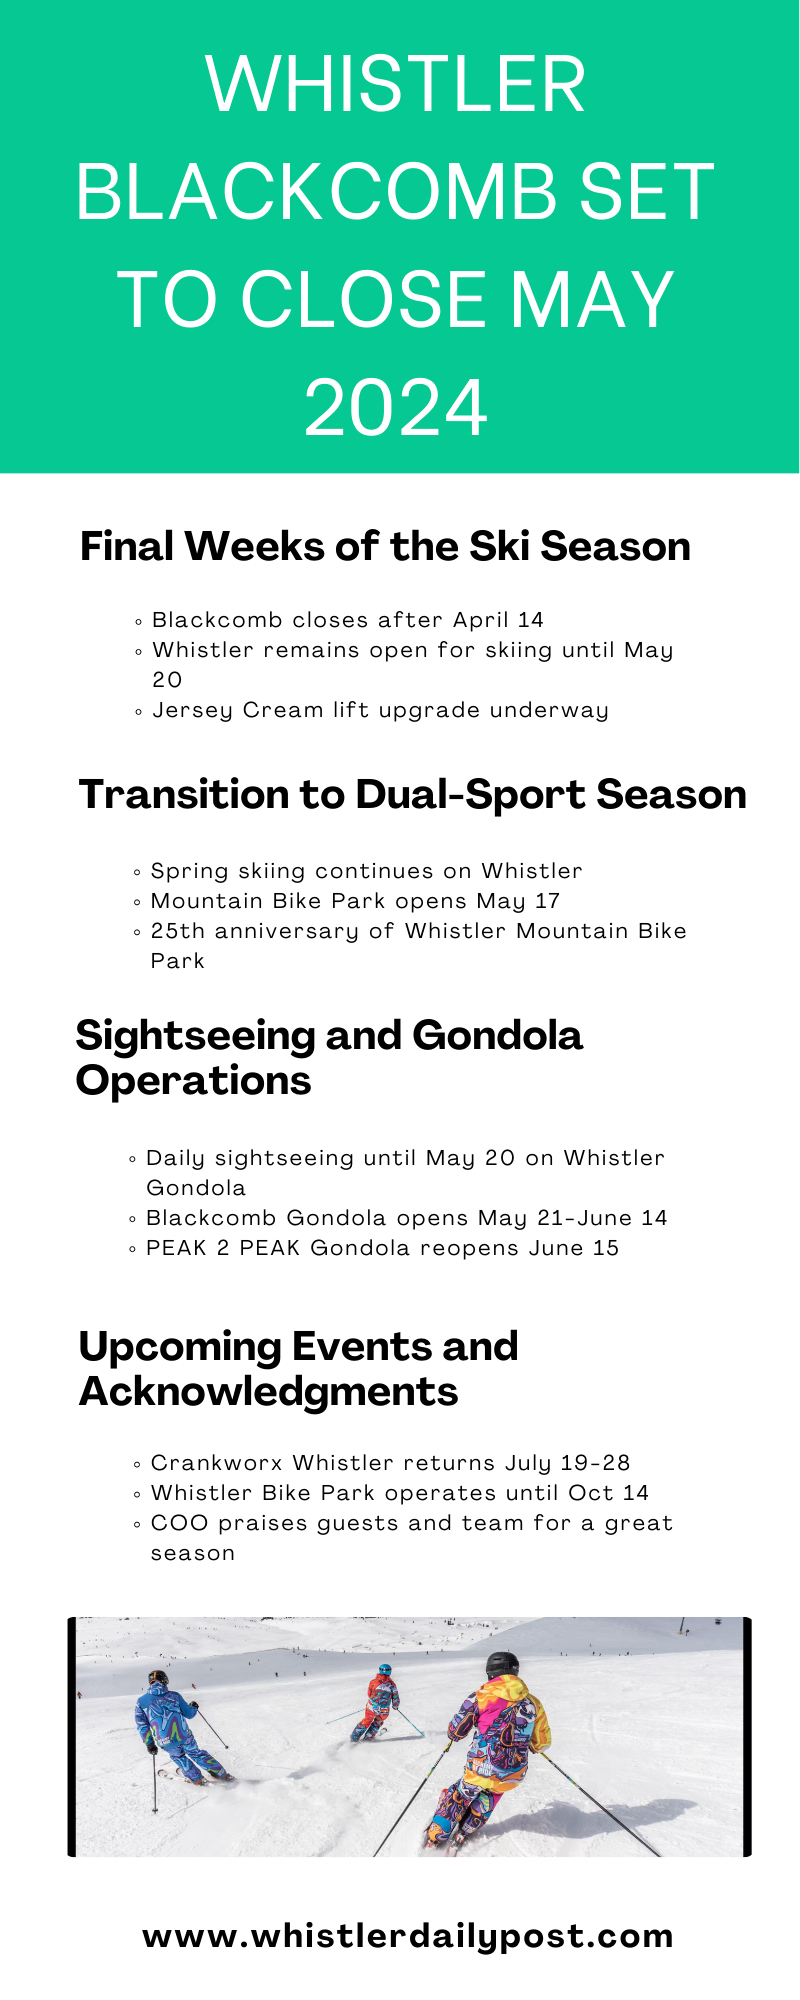 Whistler Blackcomb Set to Close May 2024.png | Pearltrees